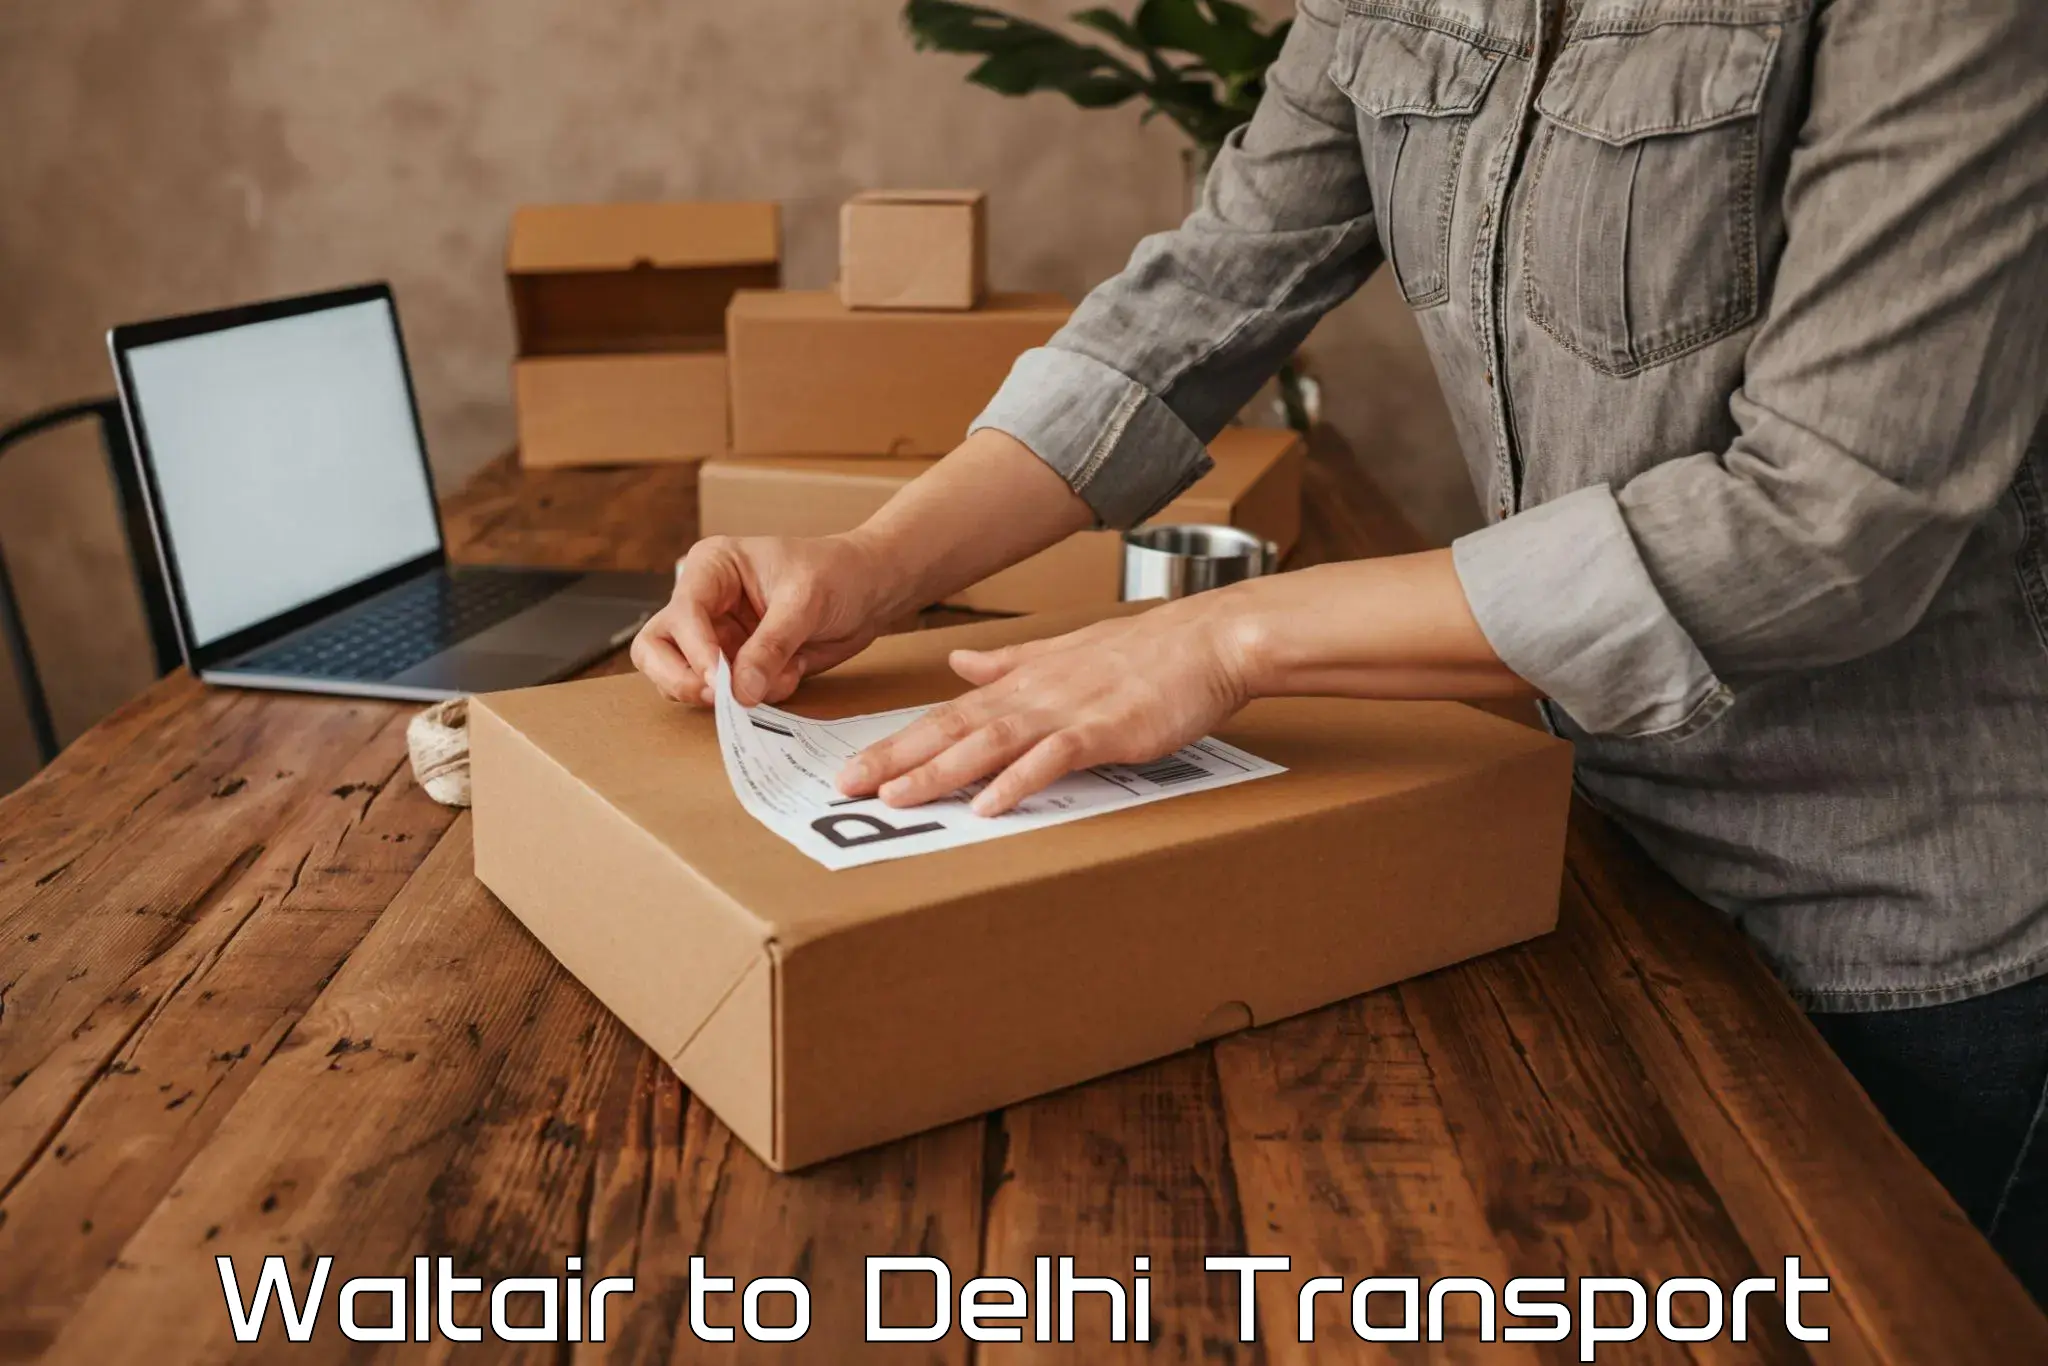 Nearby transport service Waltair to University of Delhi